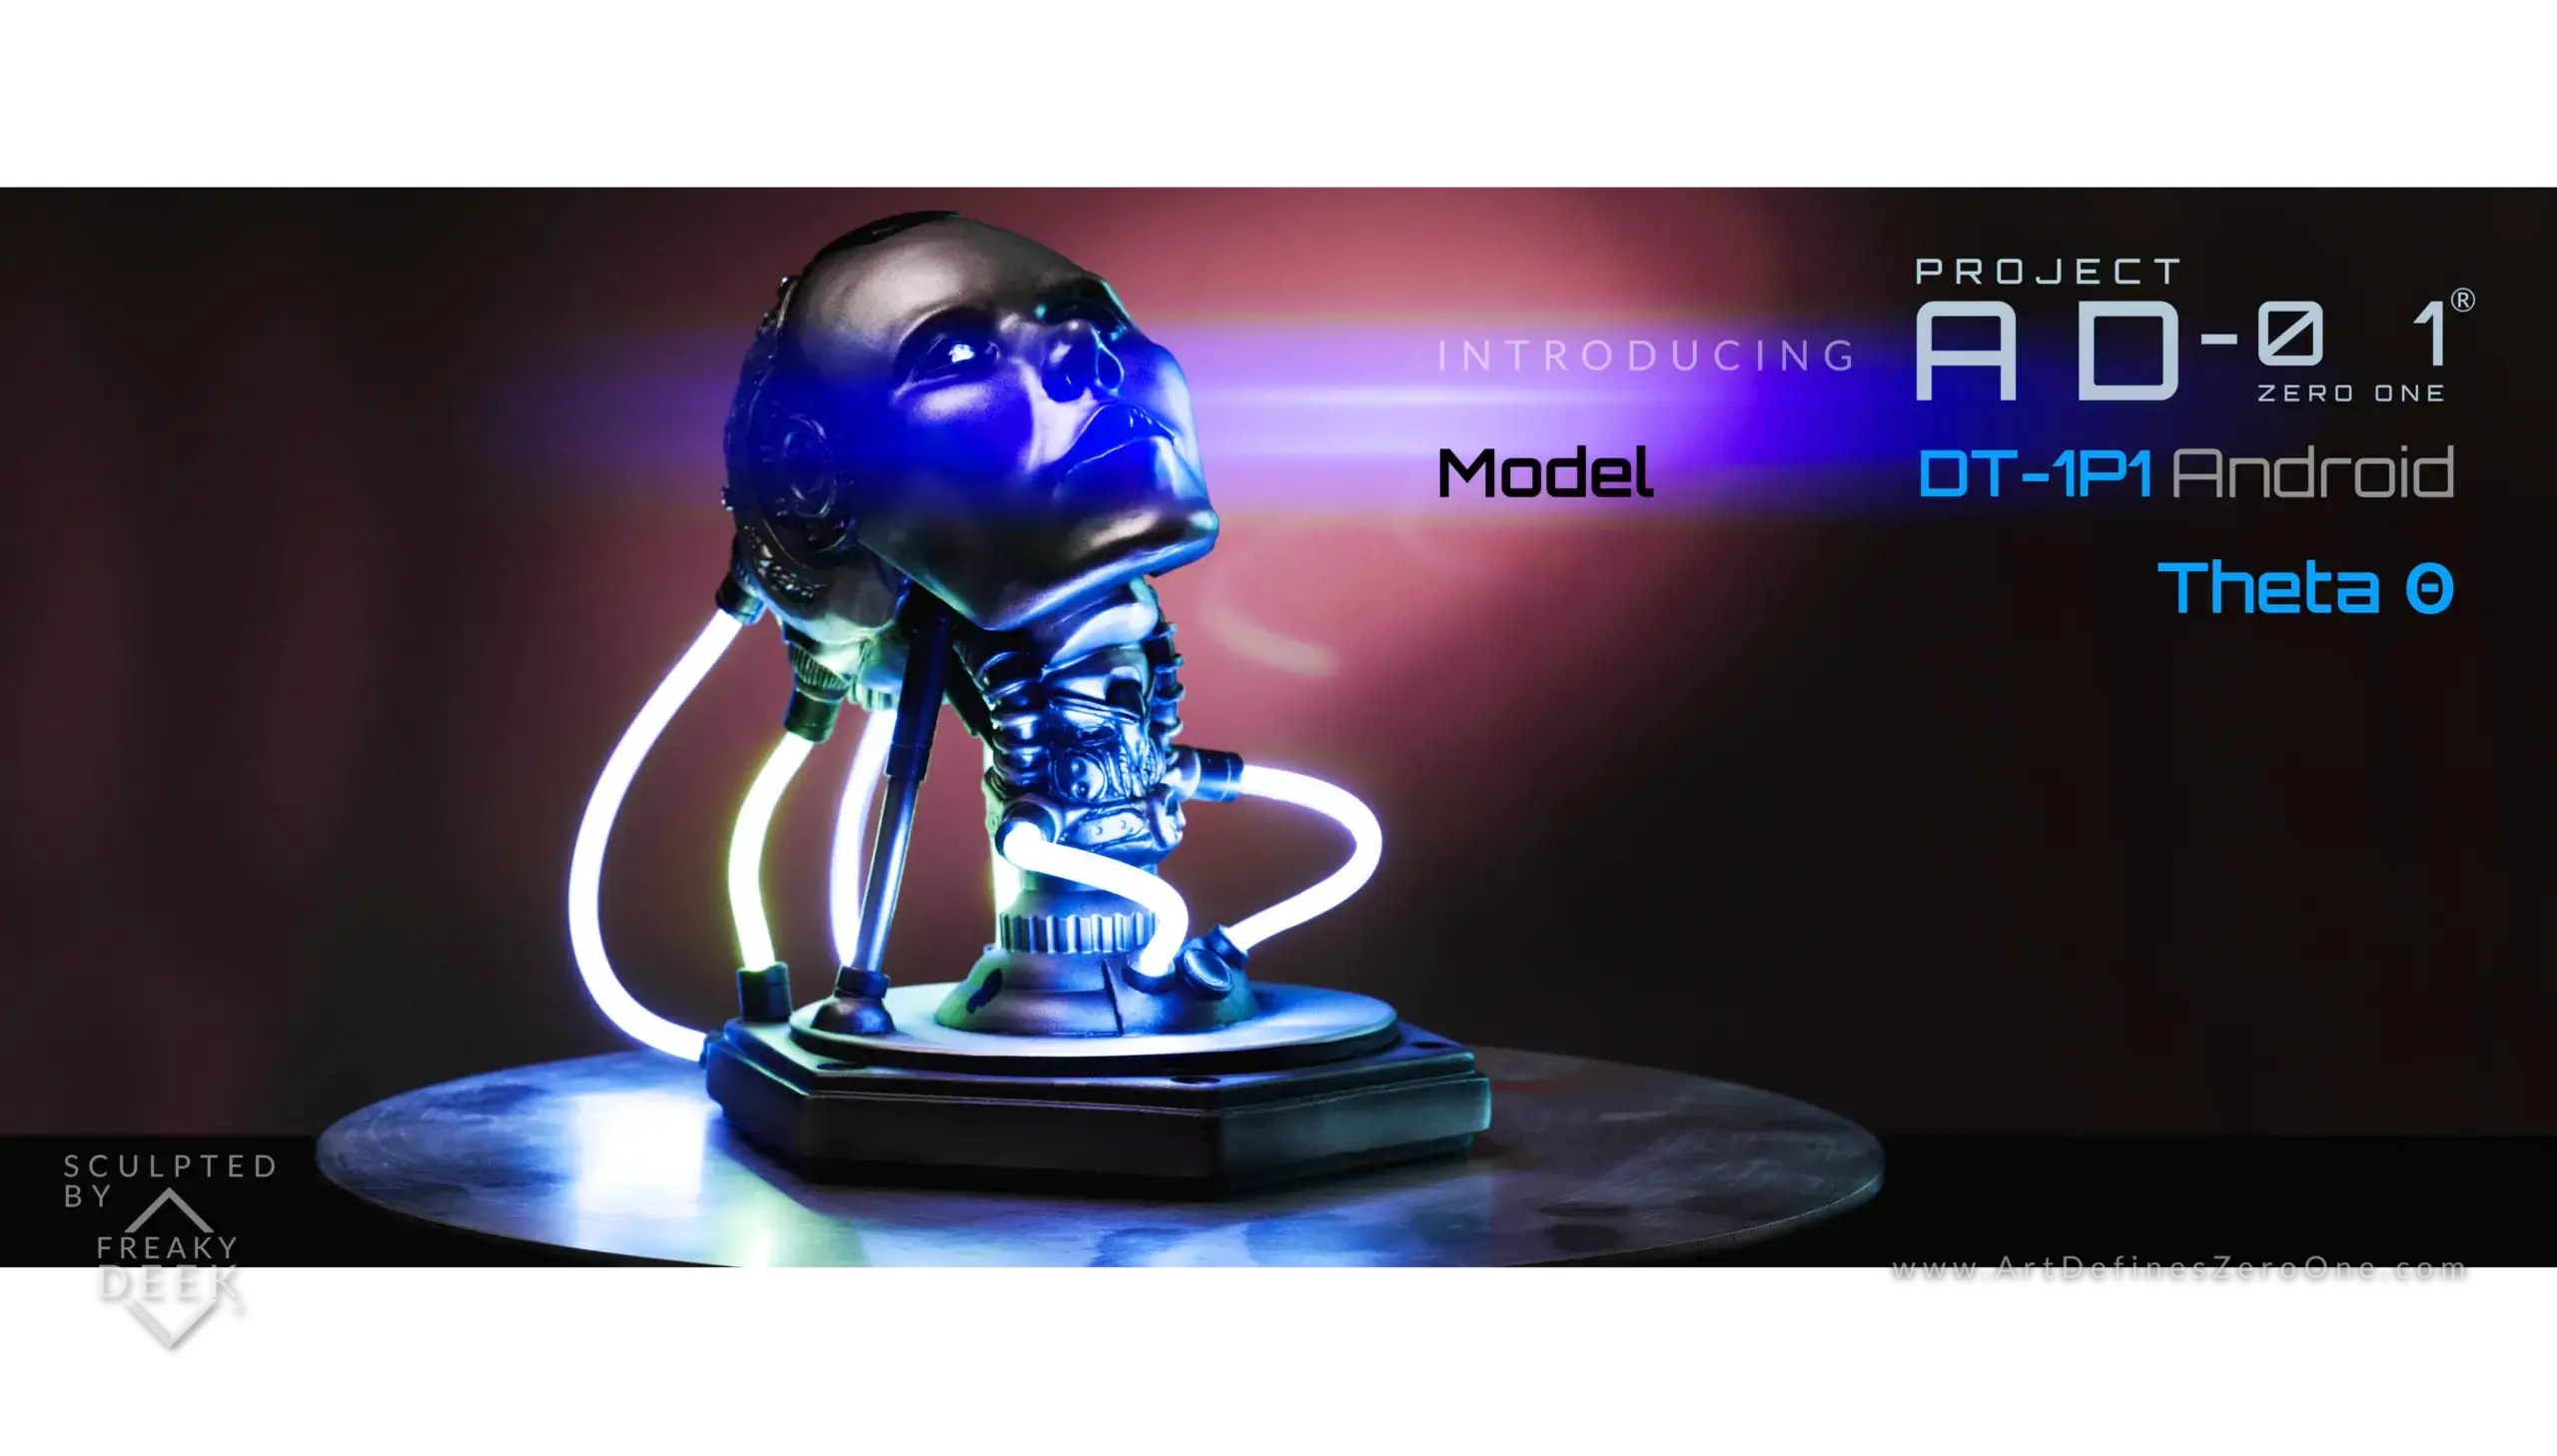 Project AD-01 handmade android sculpture Theta with LED light front view